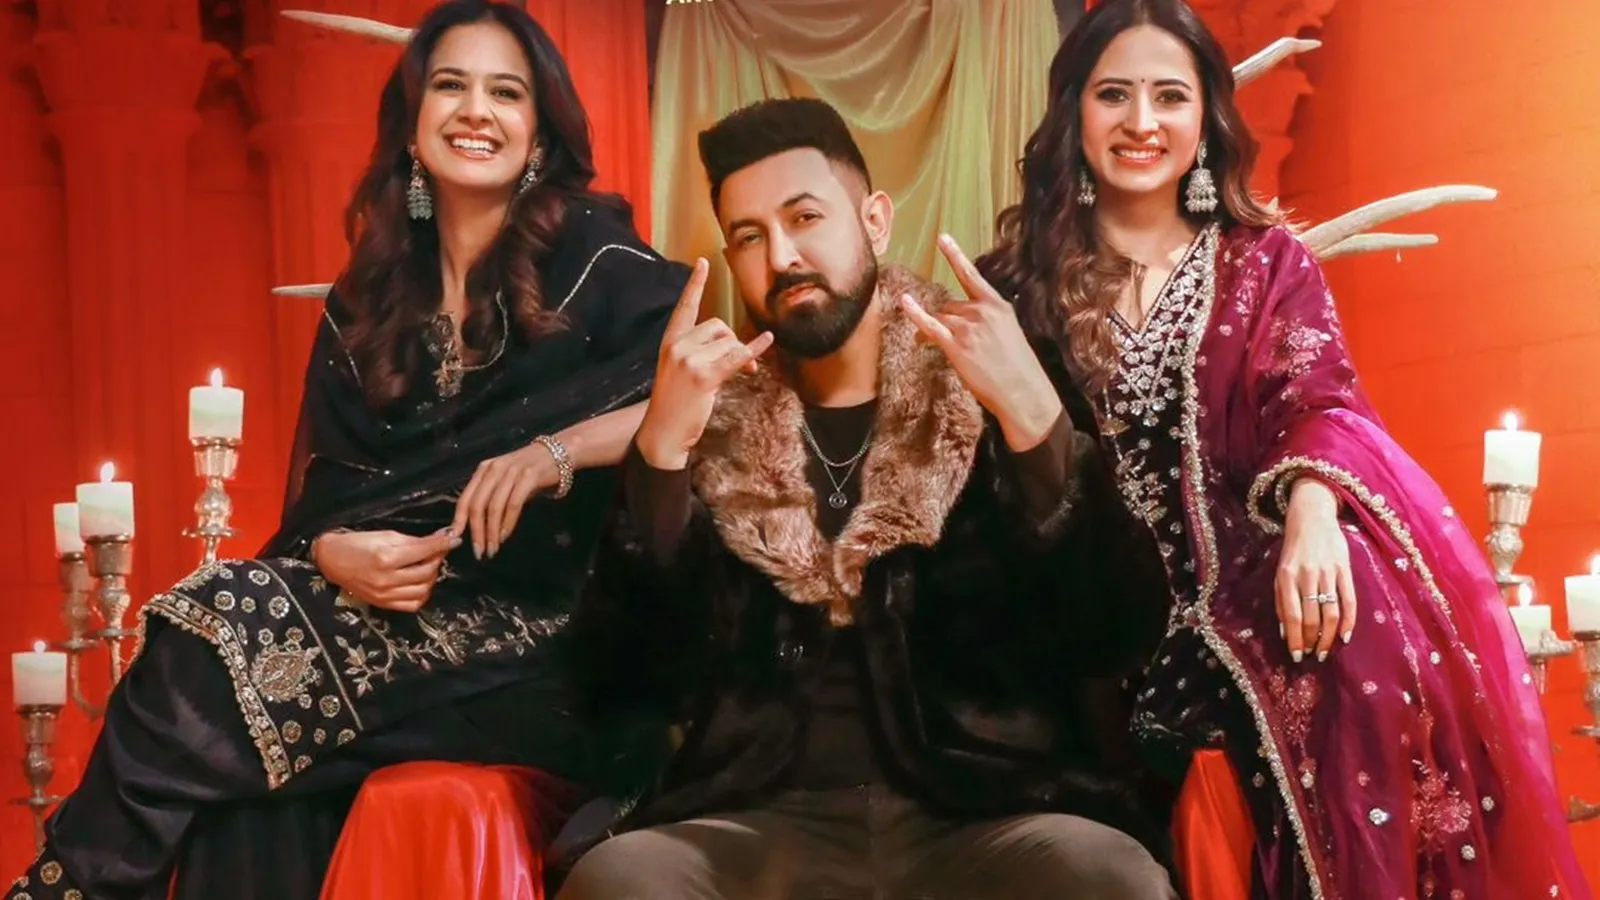 Jatt Nuu Chudail Takri movie review: Sargun Mehta fights for women's  dignity in Gippy Grewal-led horror-comedy | Movie-review News - The Indian  Express